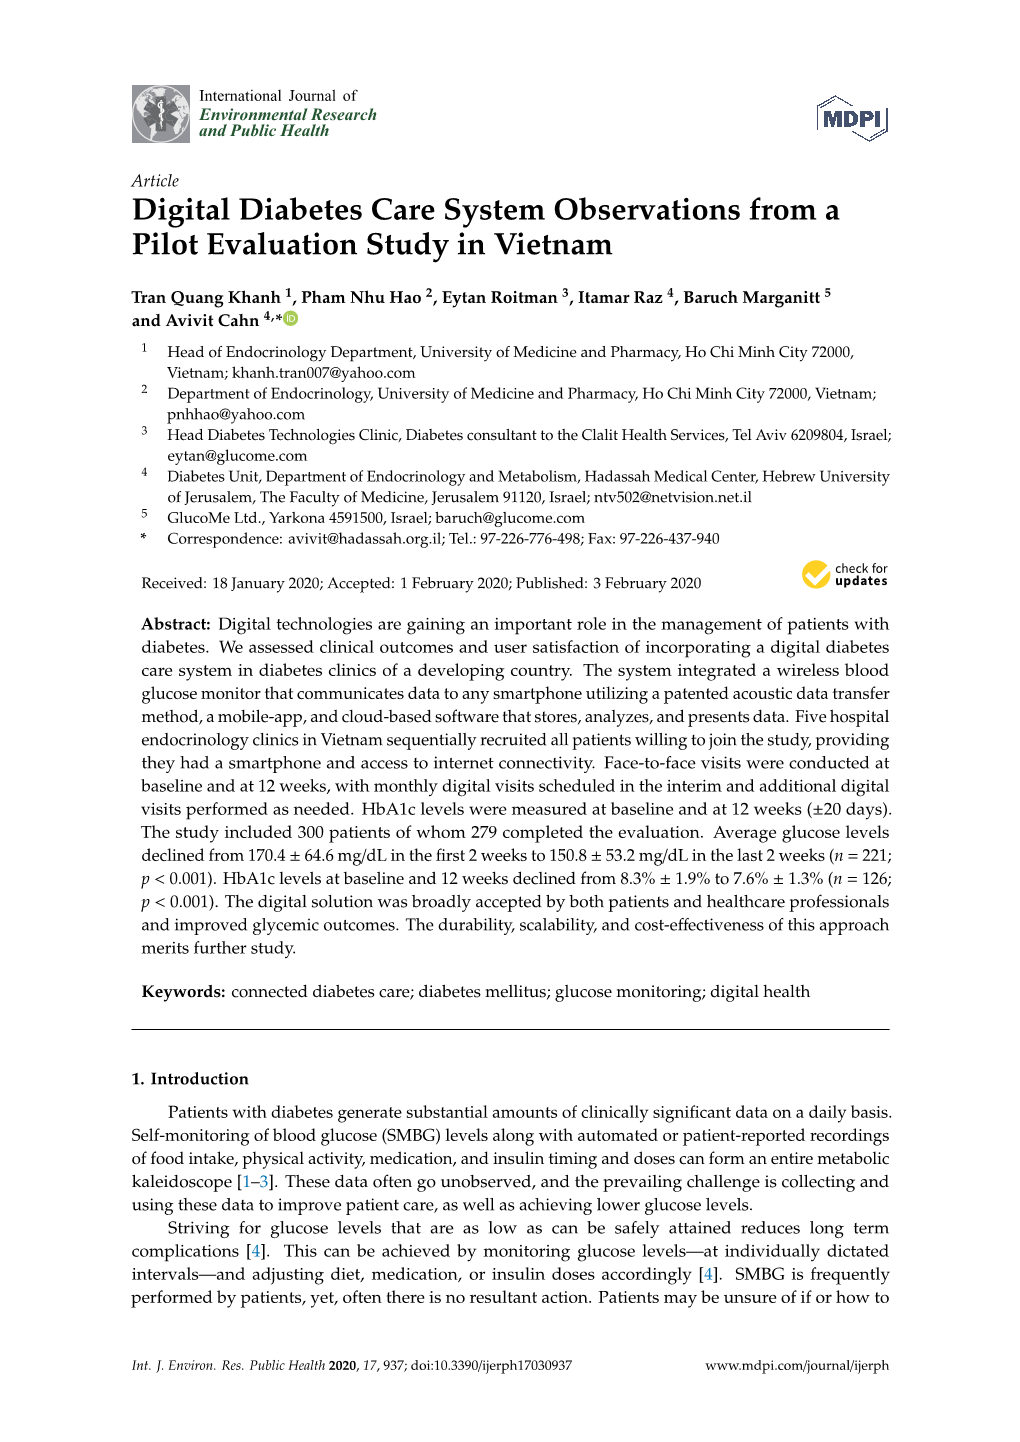 Digital Diabetes Care System Observations from a Pilot Evaluation Study in Vietnam